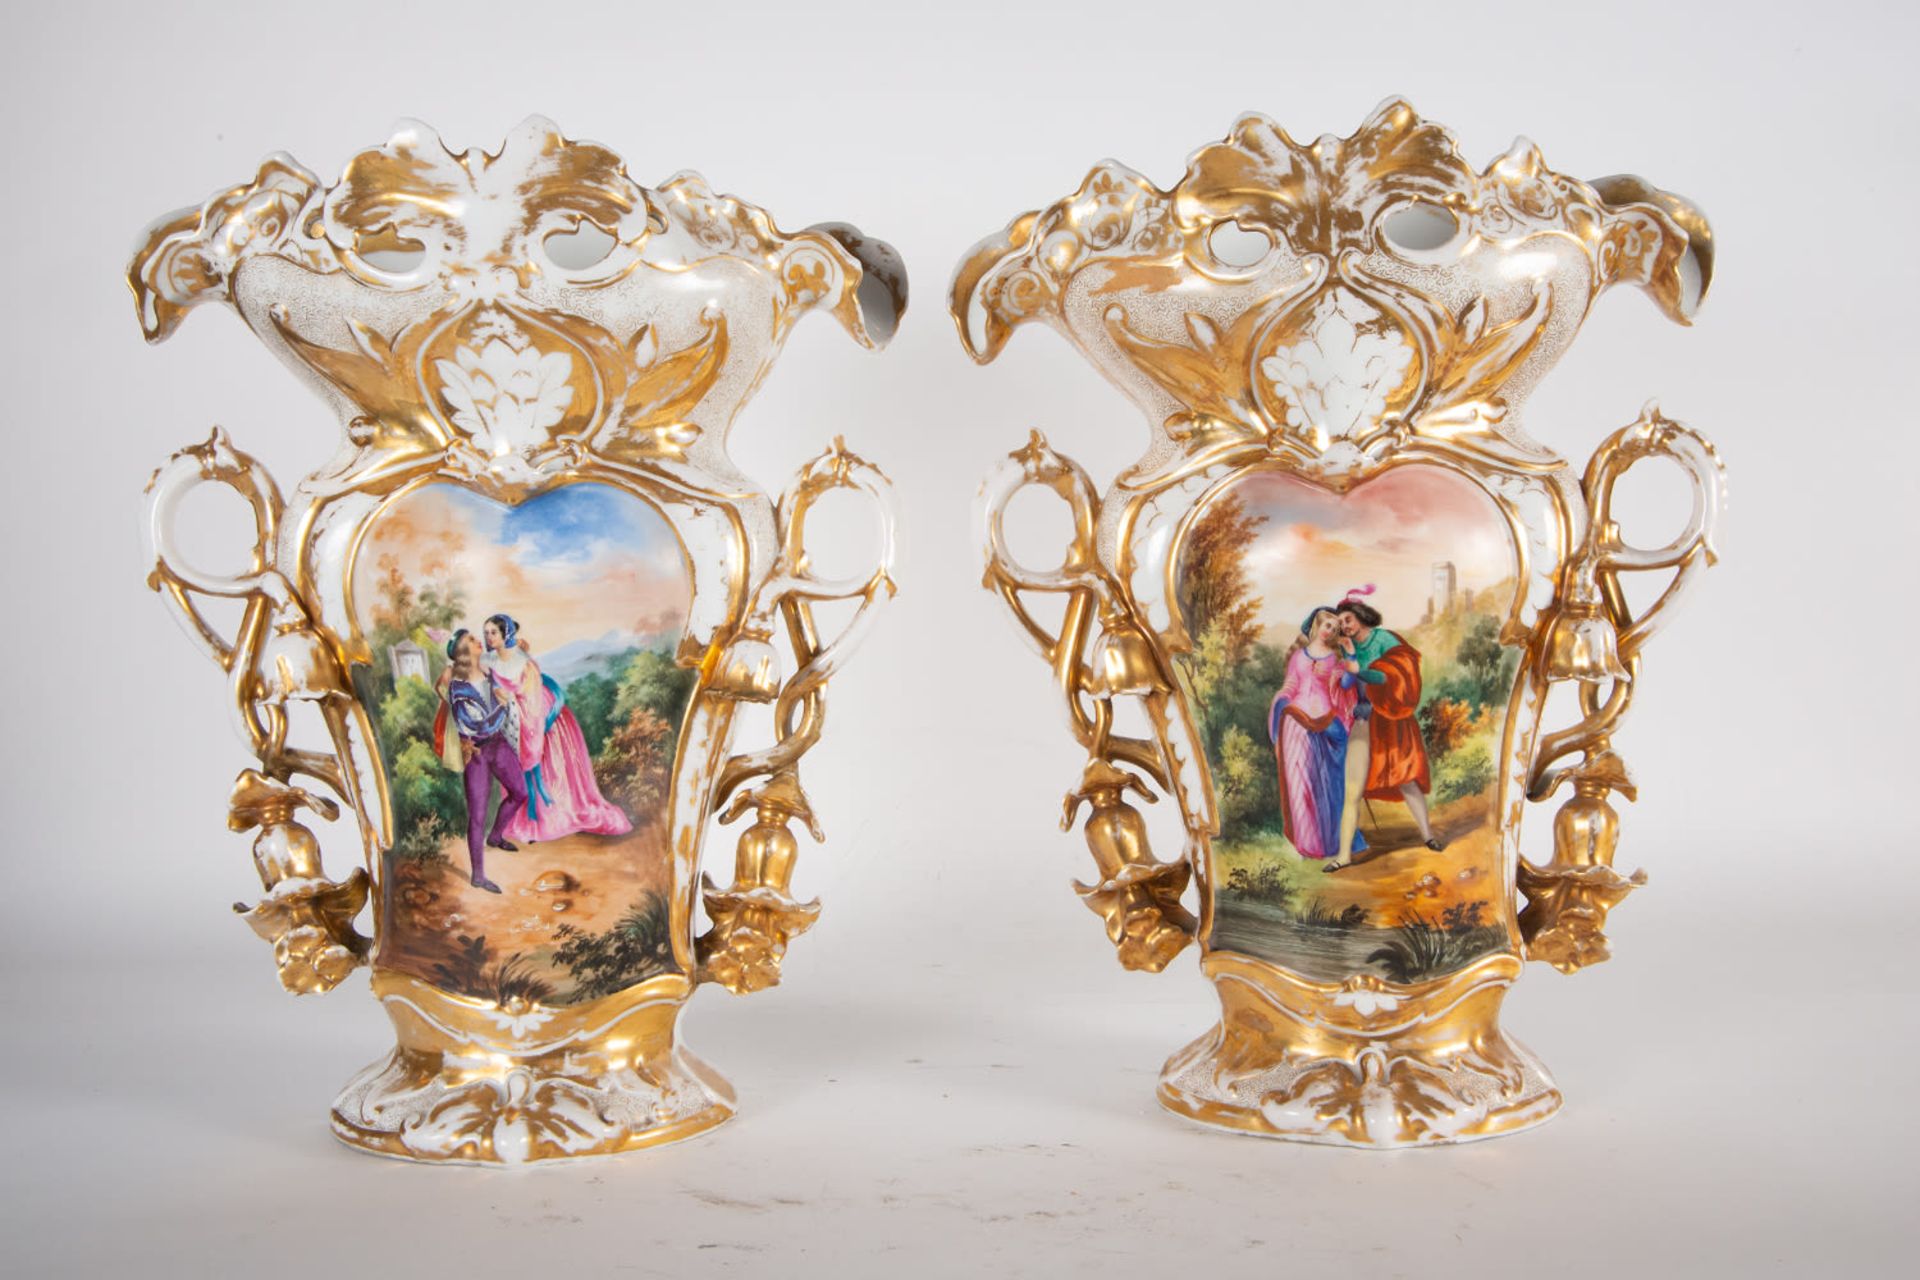 Pair of Elizabethan Vases in enameled and polychrome porcelain, 19th century